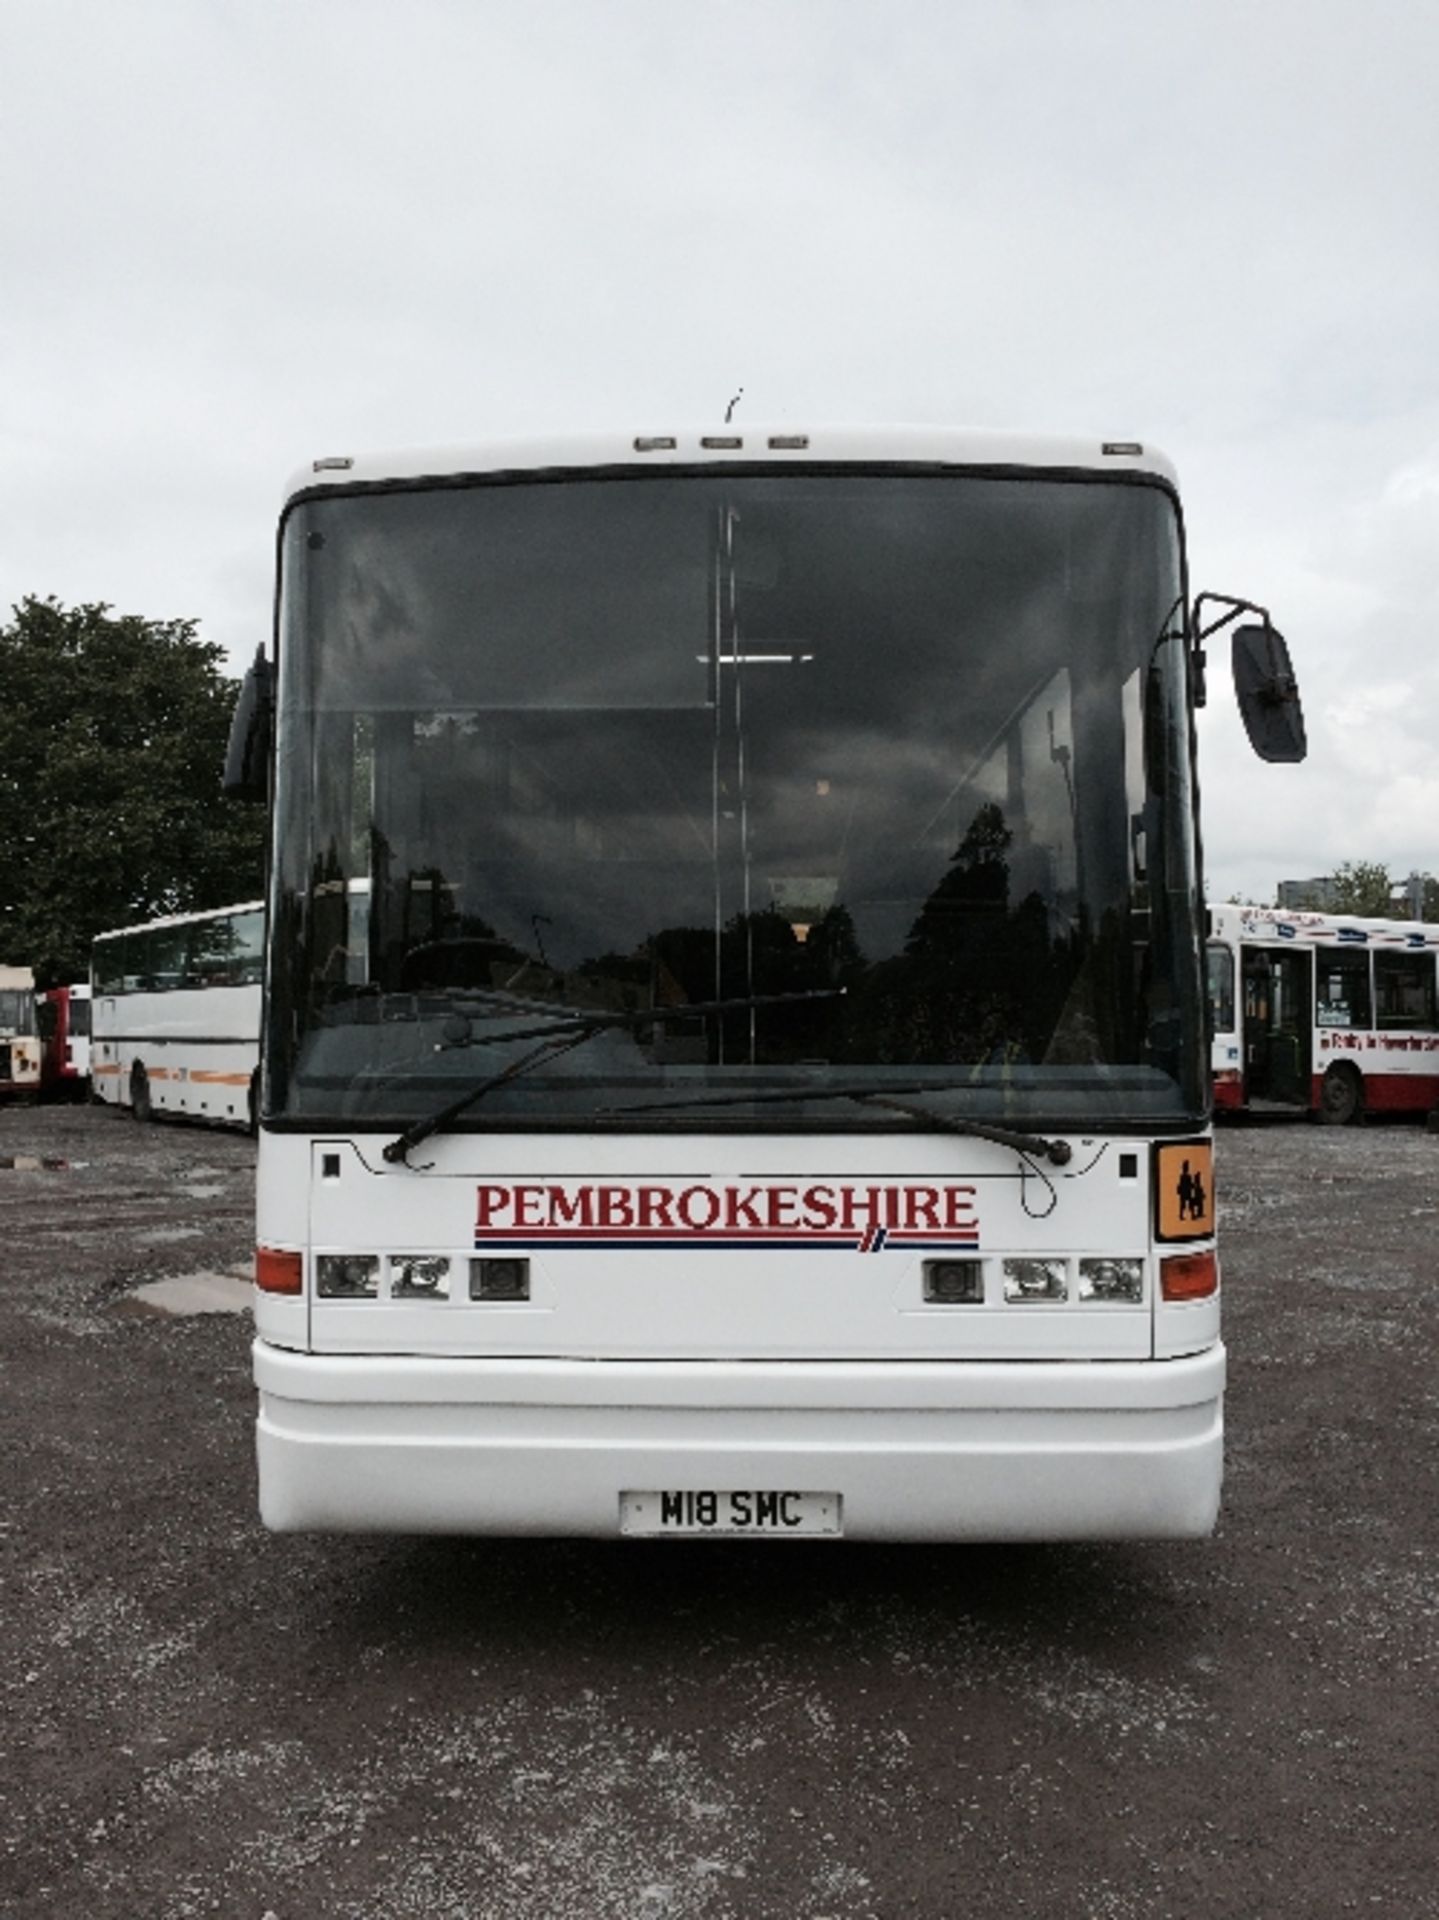 Dennis Javelin / UVG S320 Cutlass 70 seater capacity coach, 3 point seat belts, Registration No. M18